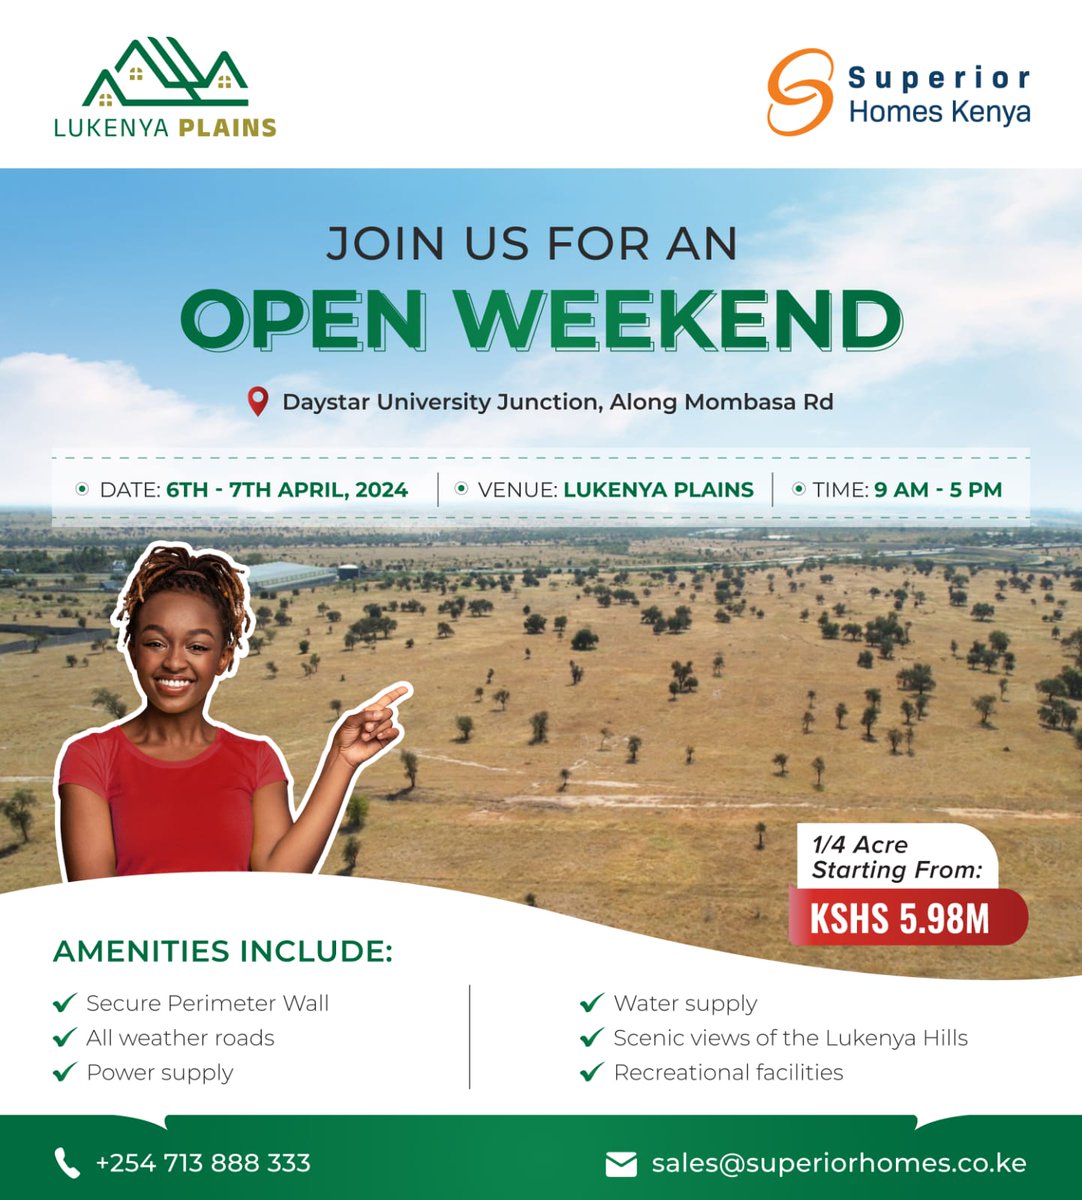 Are you ready for the Lukenya Plains Open Weekend?

Don't miss this opportunity to own your dream home!

Reserve your spot today!
📞 0713 888 333
📧 sales@superiorhomes.co.ke

#investment #plotsforsale #selfbuildplots #openweekend #LukenyaPlains
#LukenyaPlainsOpenWeekend